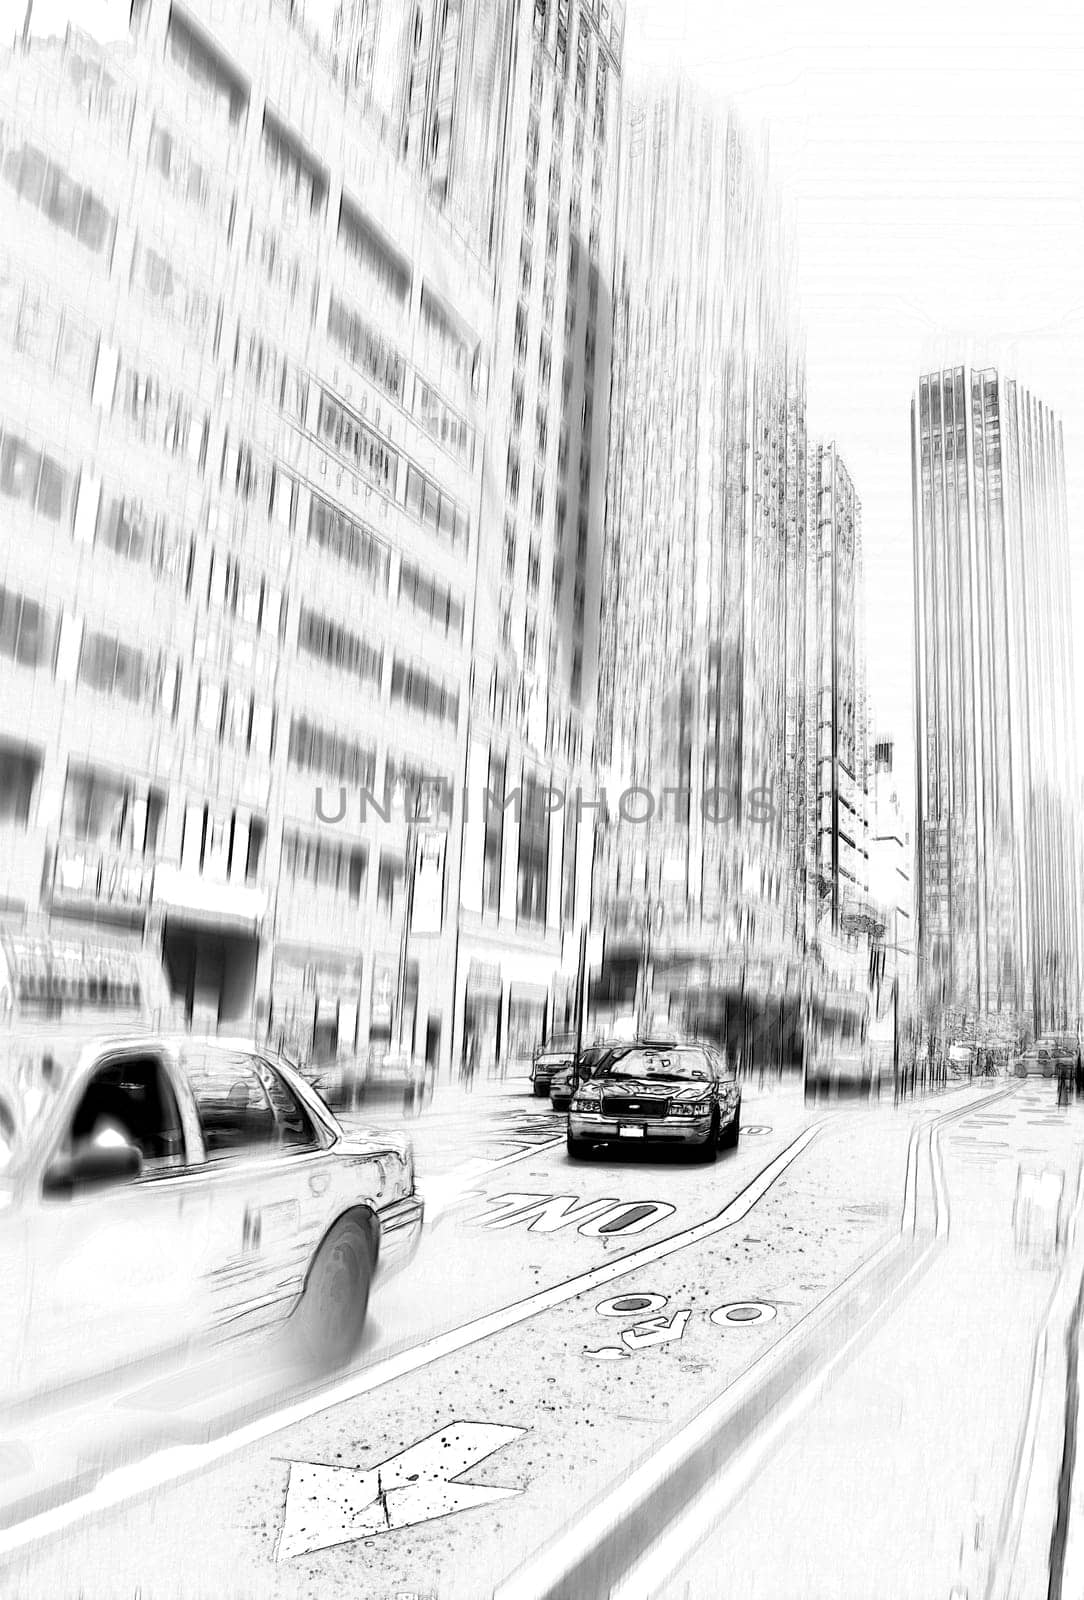 Illustration, city and drawing with sketch, motion and buildings with car, road and creativity. Abstract, vehicle and artistic with travel, graphic design and New York with art deco, skill and talent.